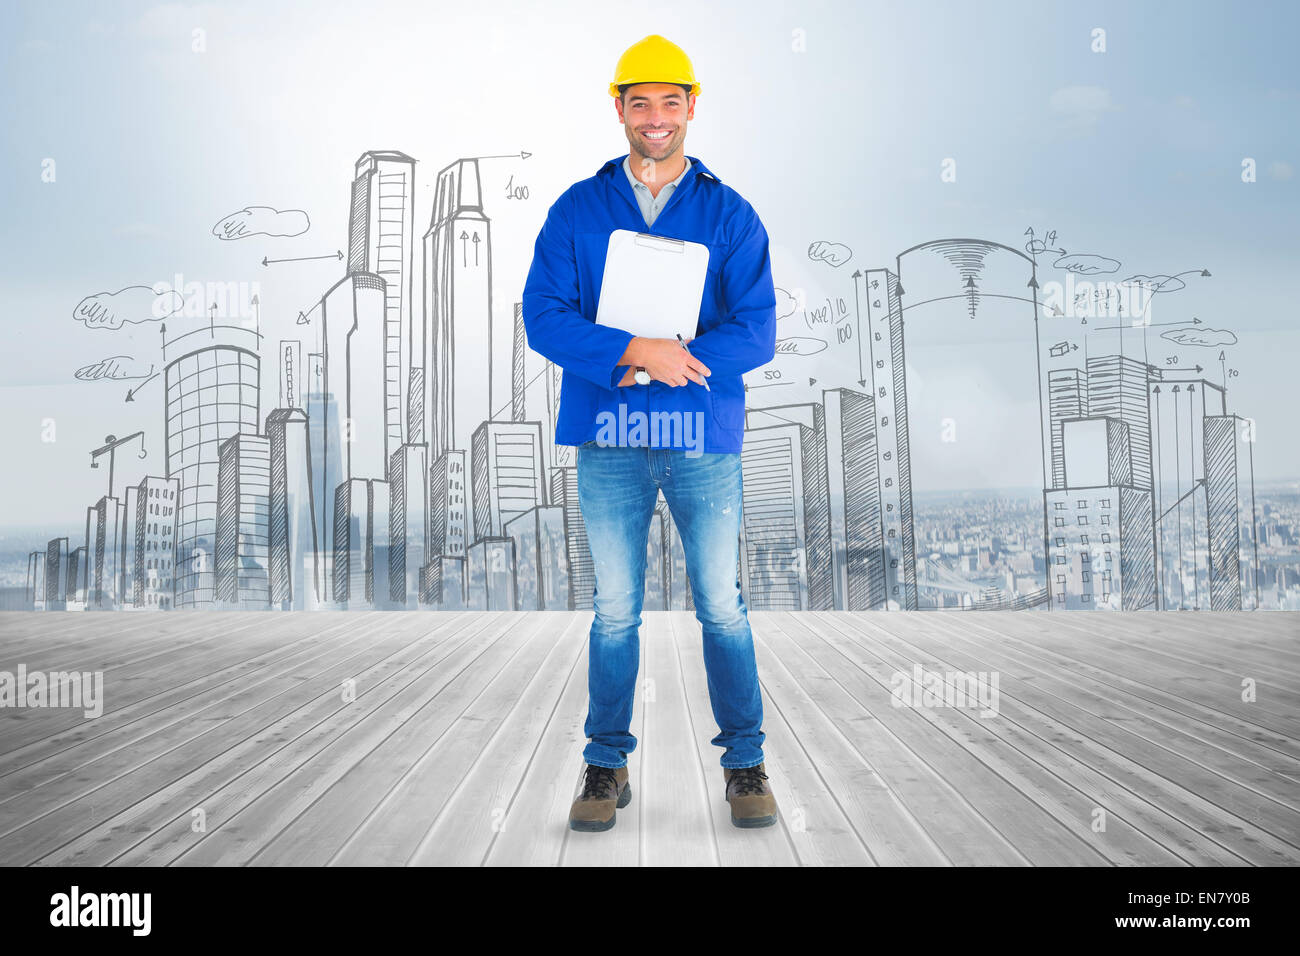 Composite image of full length portrait of happy manual worker with clipboard Stock Photo